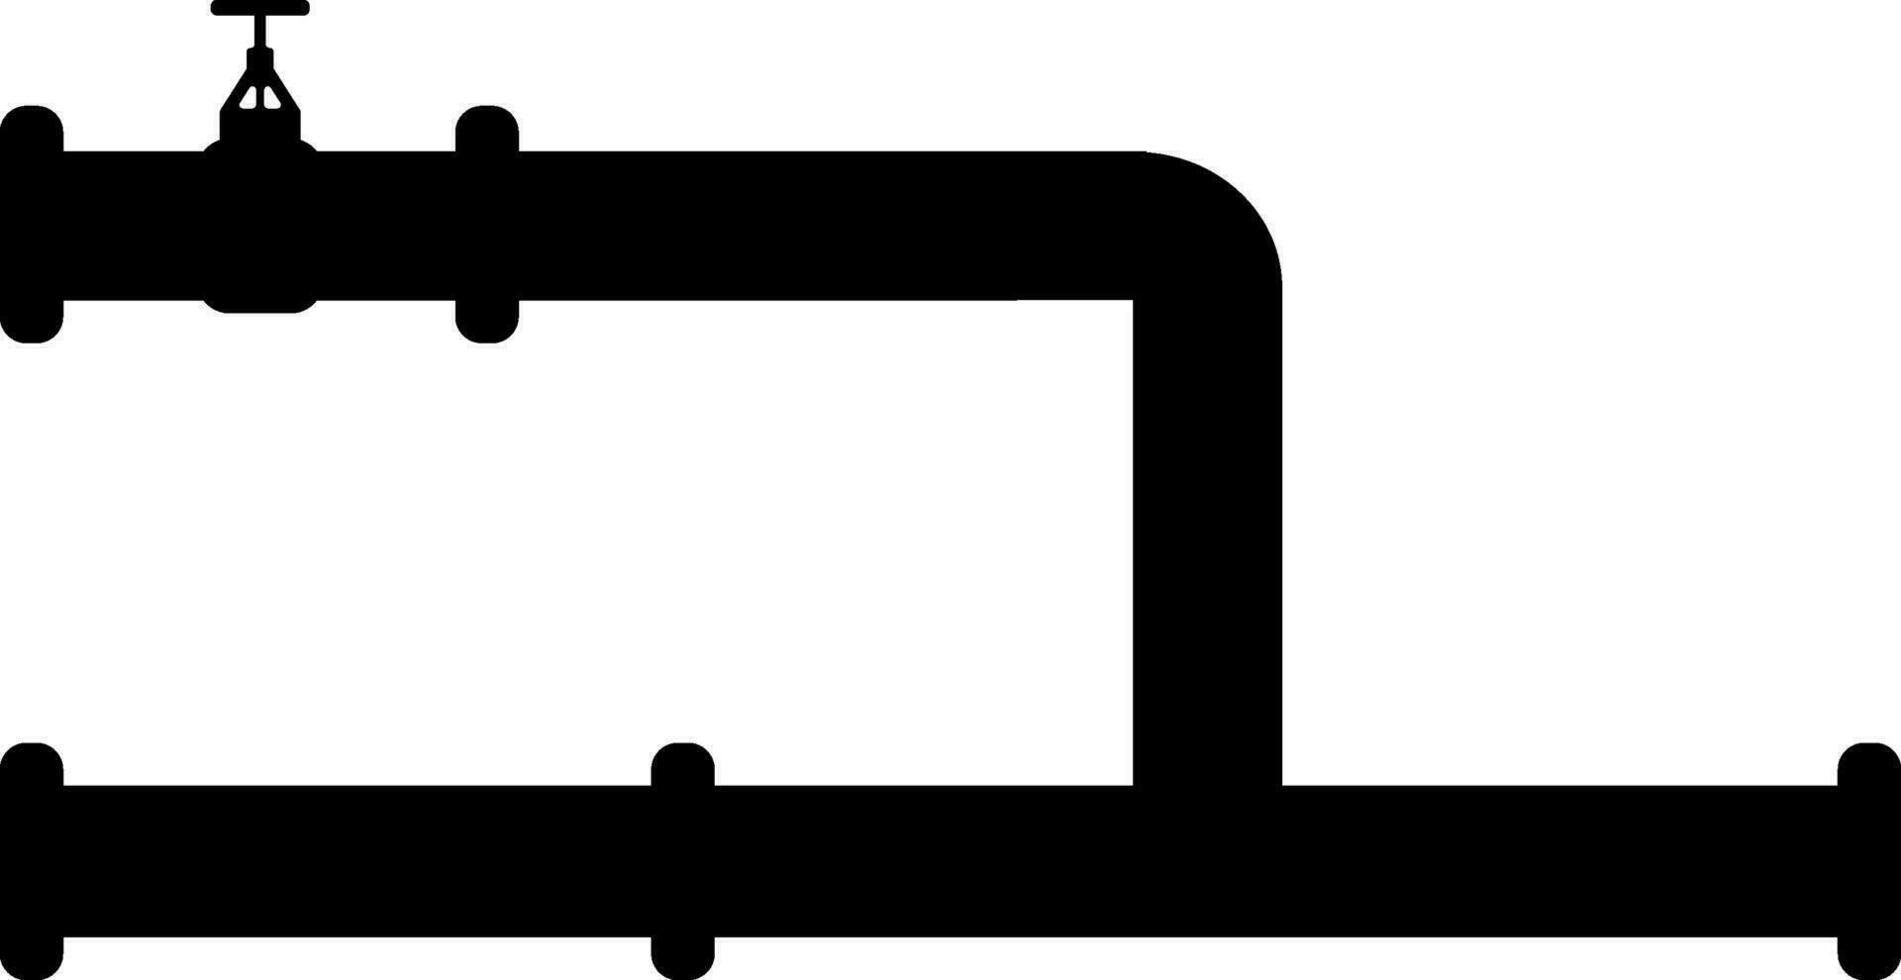 Pipeline system icon with valve in flat style. vector